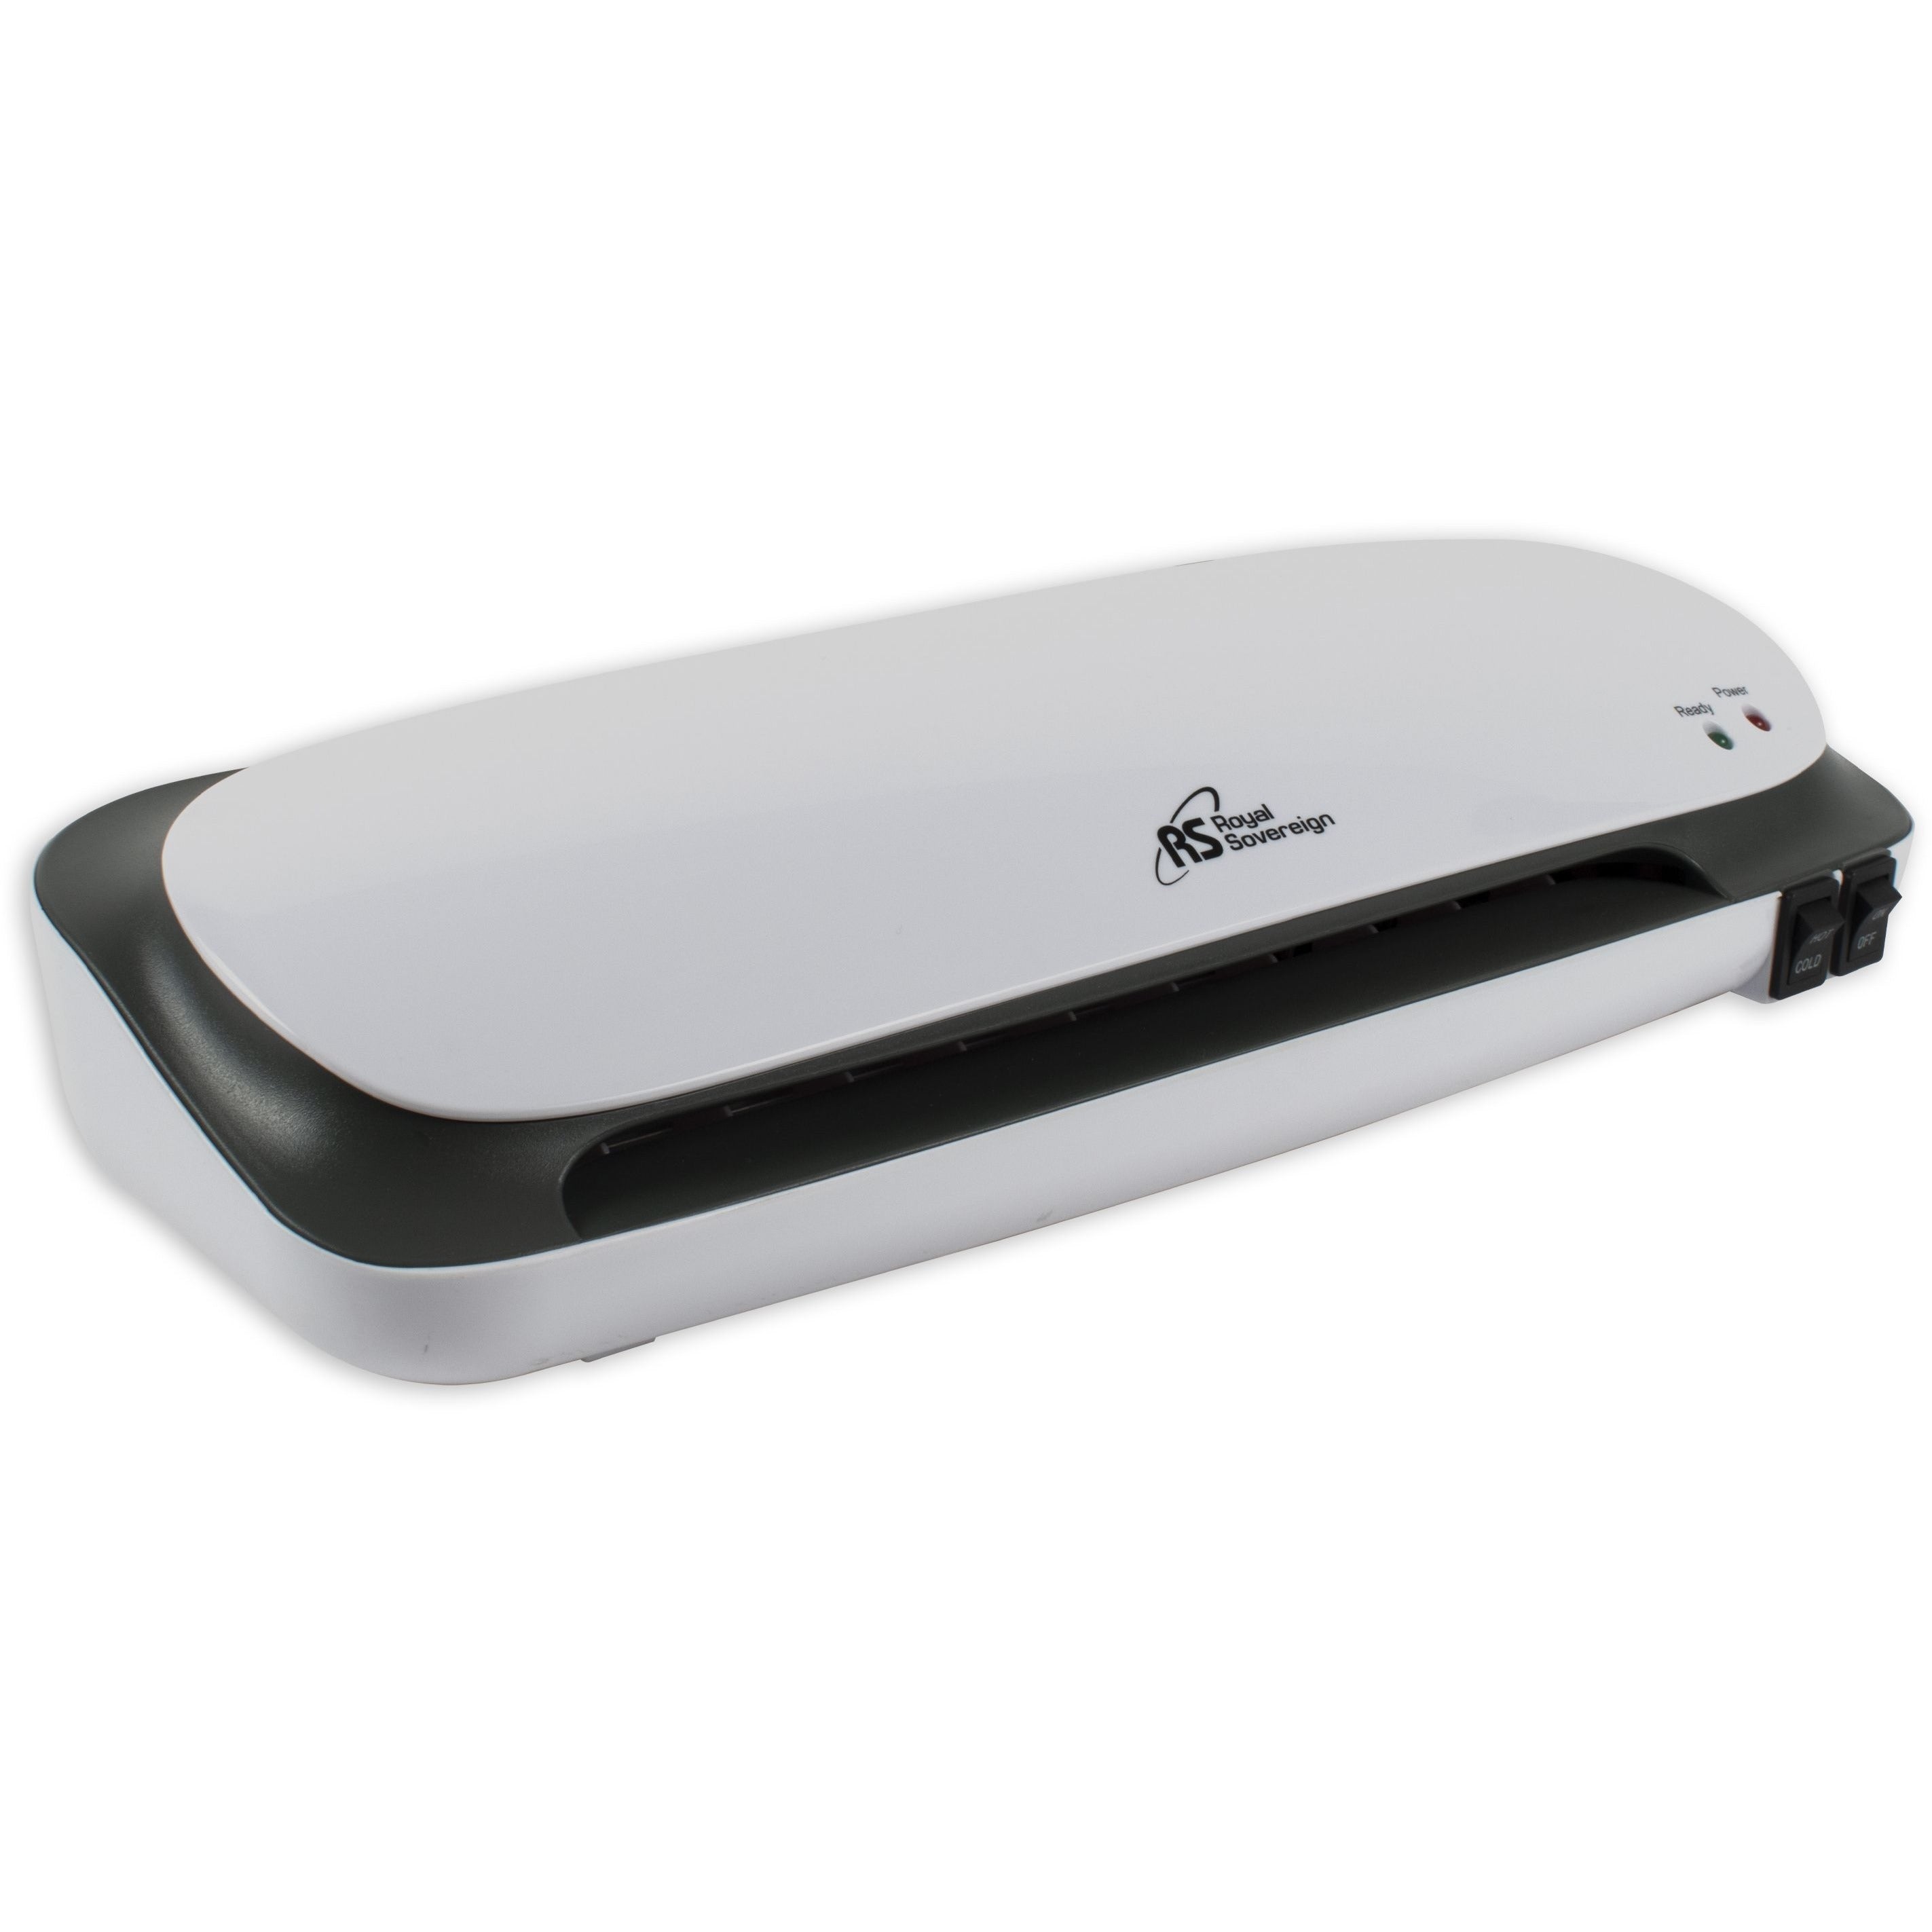 Royal Sovereign 9 Inch, 2 Roller Pouch Laminator (CL-923)